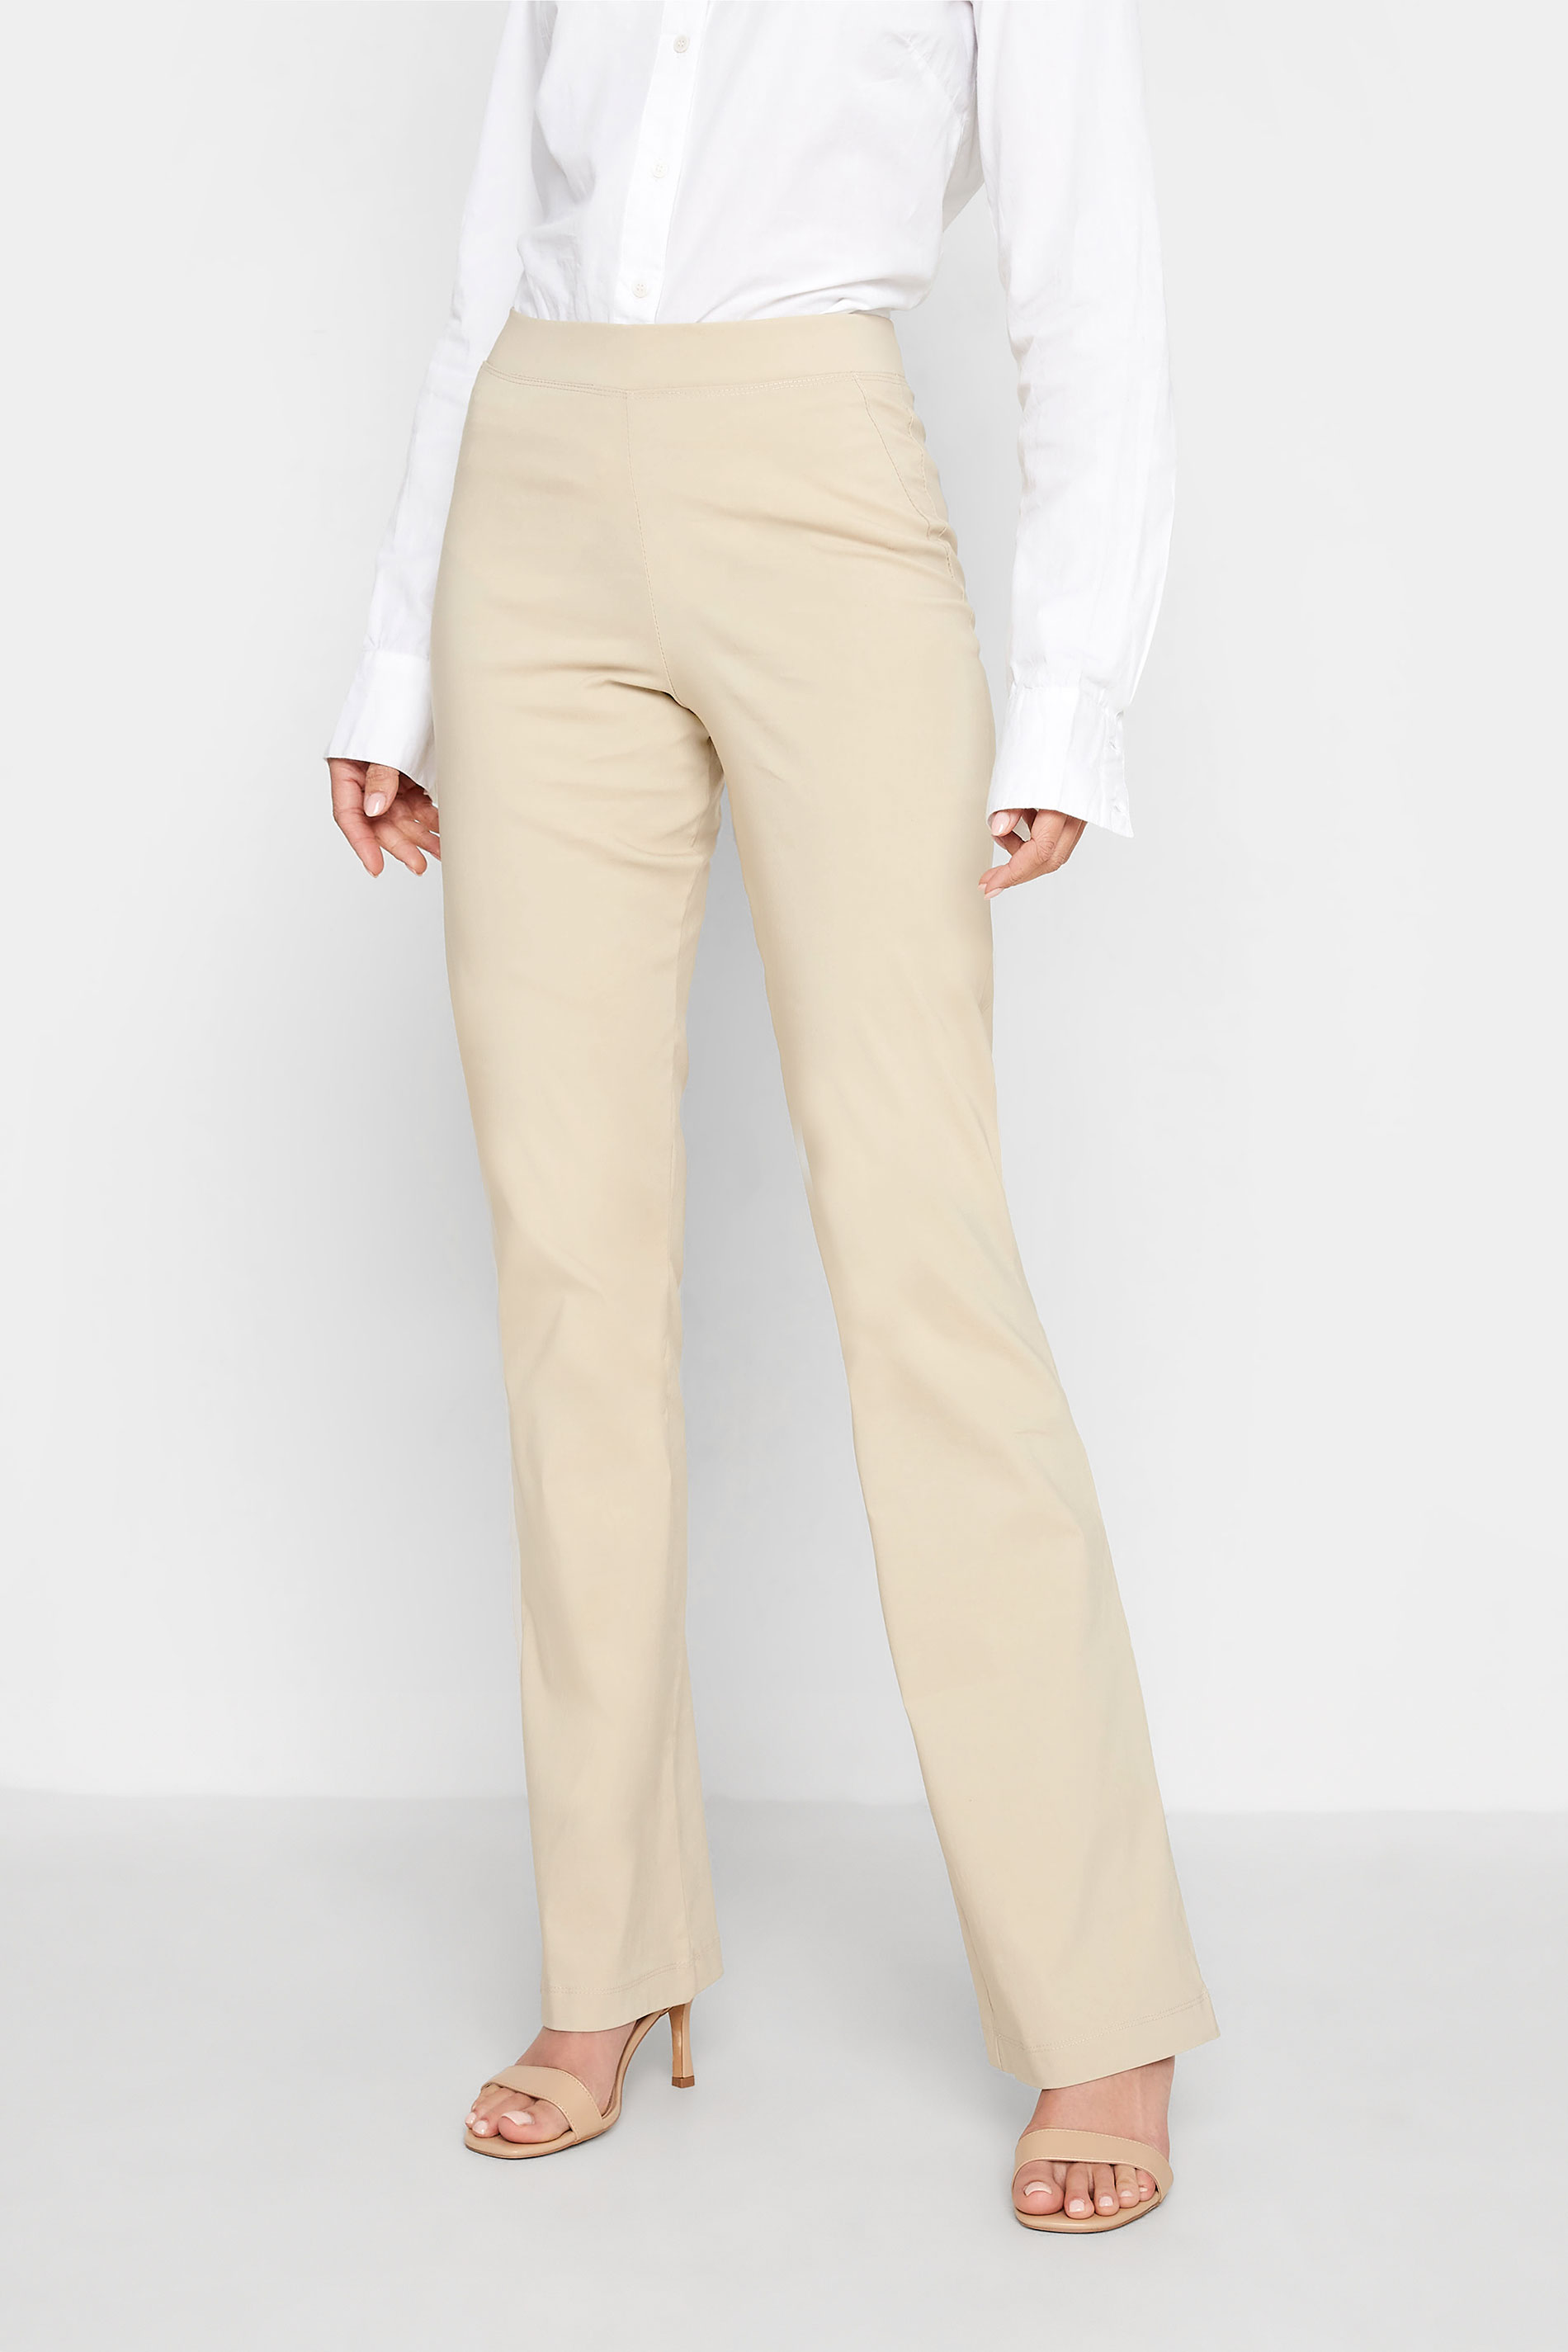 Tall Women's LTS Beige Brown Stretch Bootcut Trousers | Long Tall Sally  1